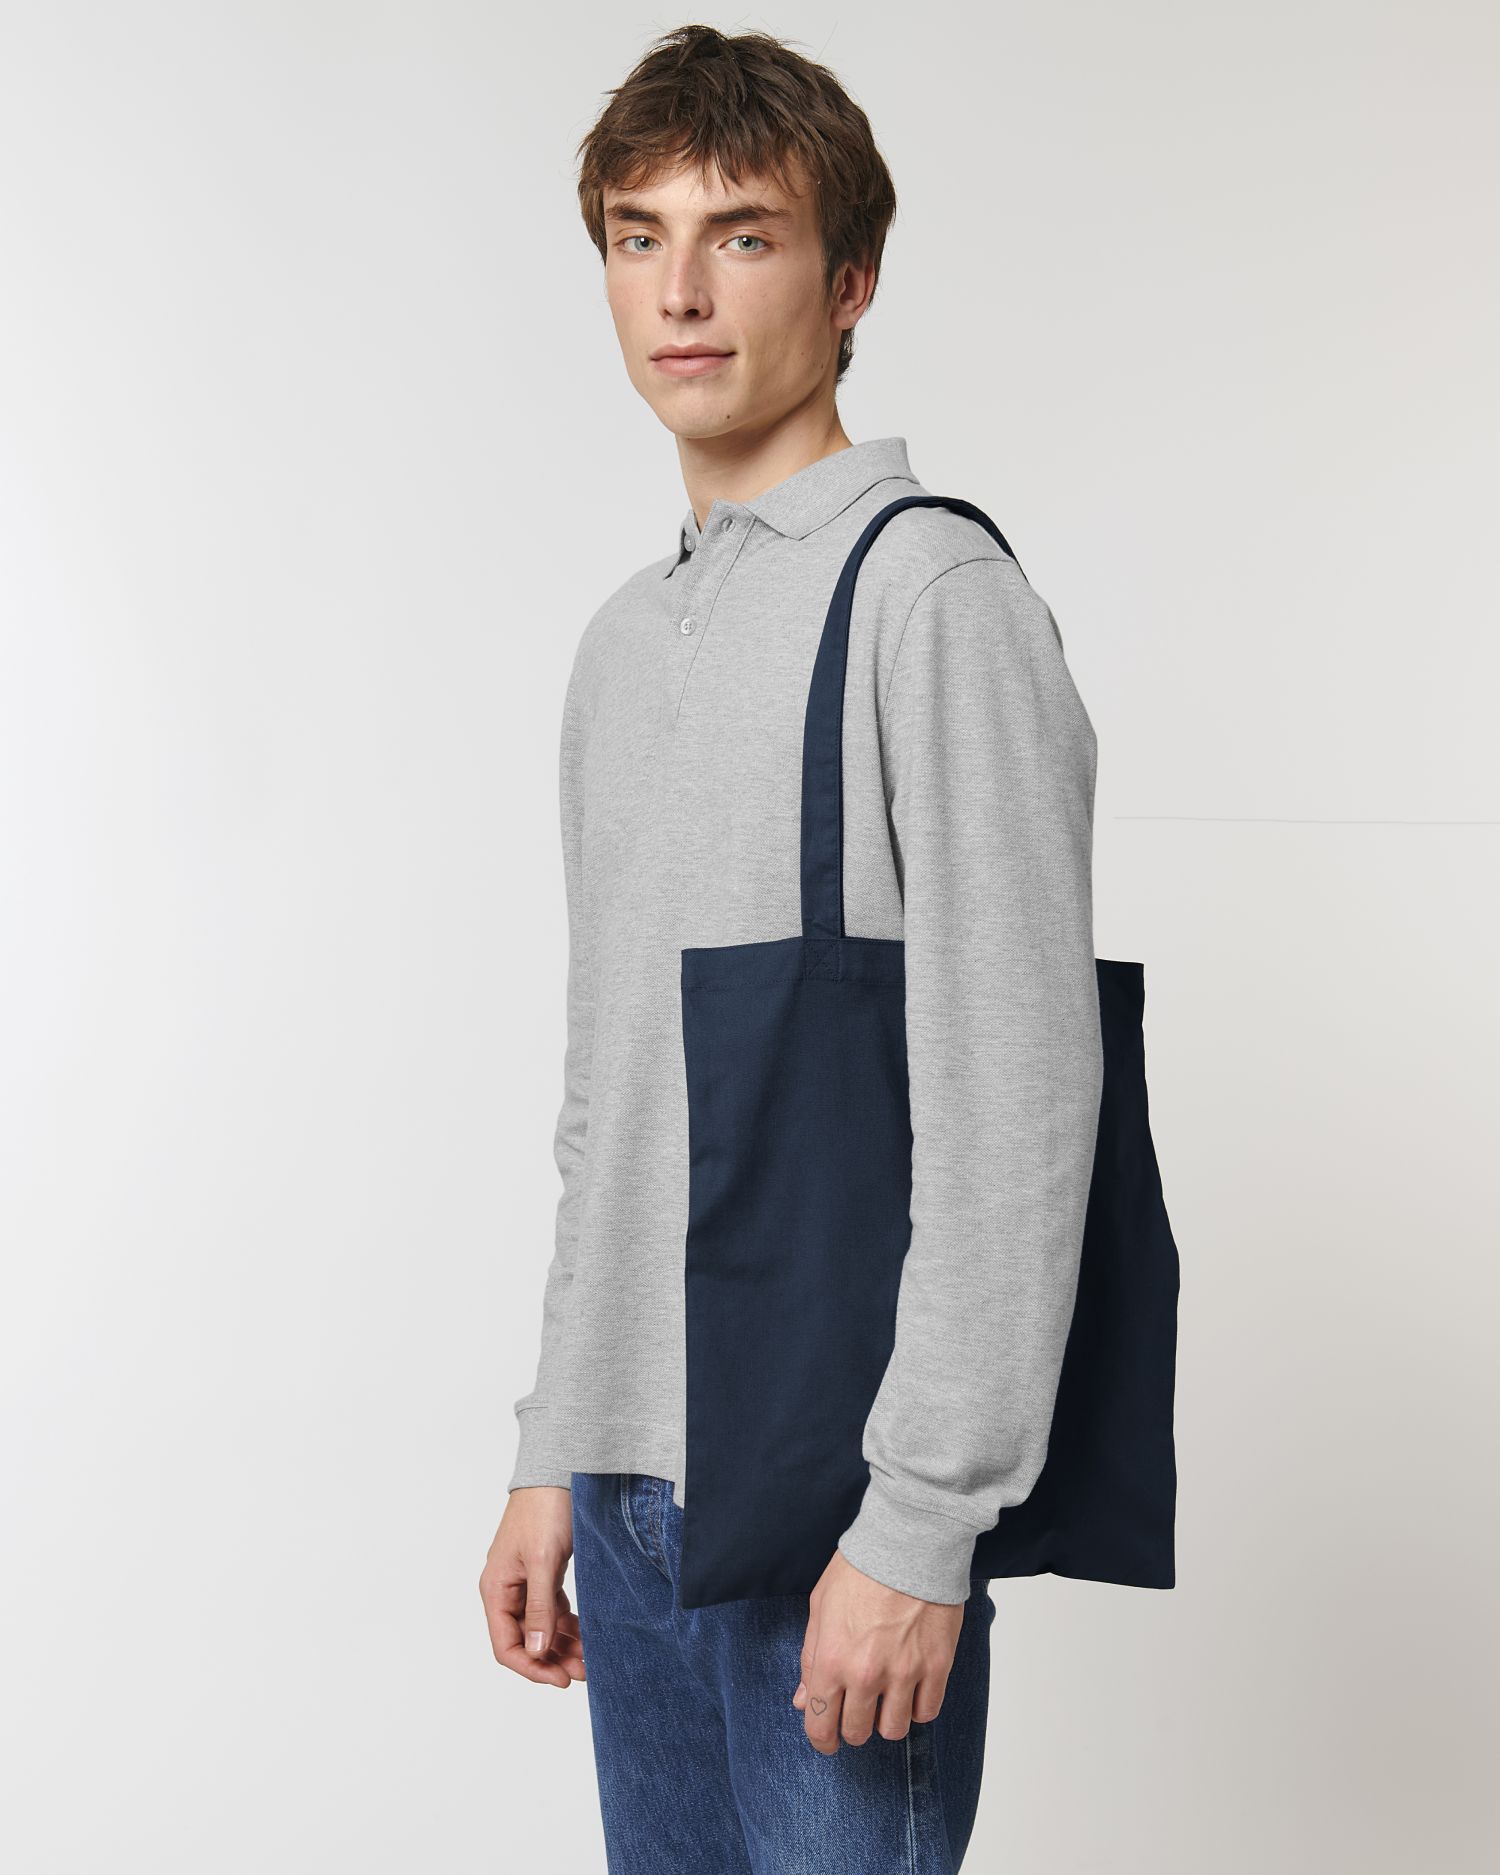  Light Tote Bag in Farbe French Navy